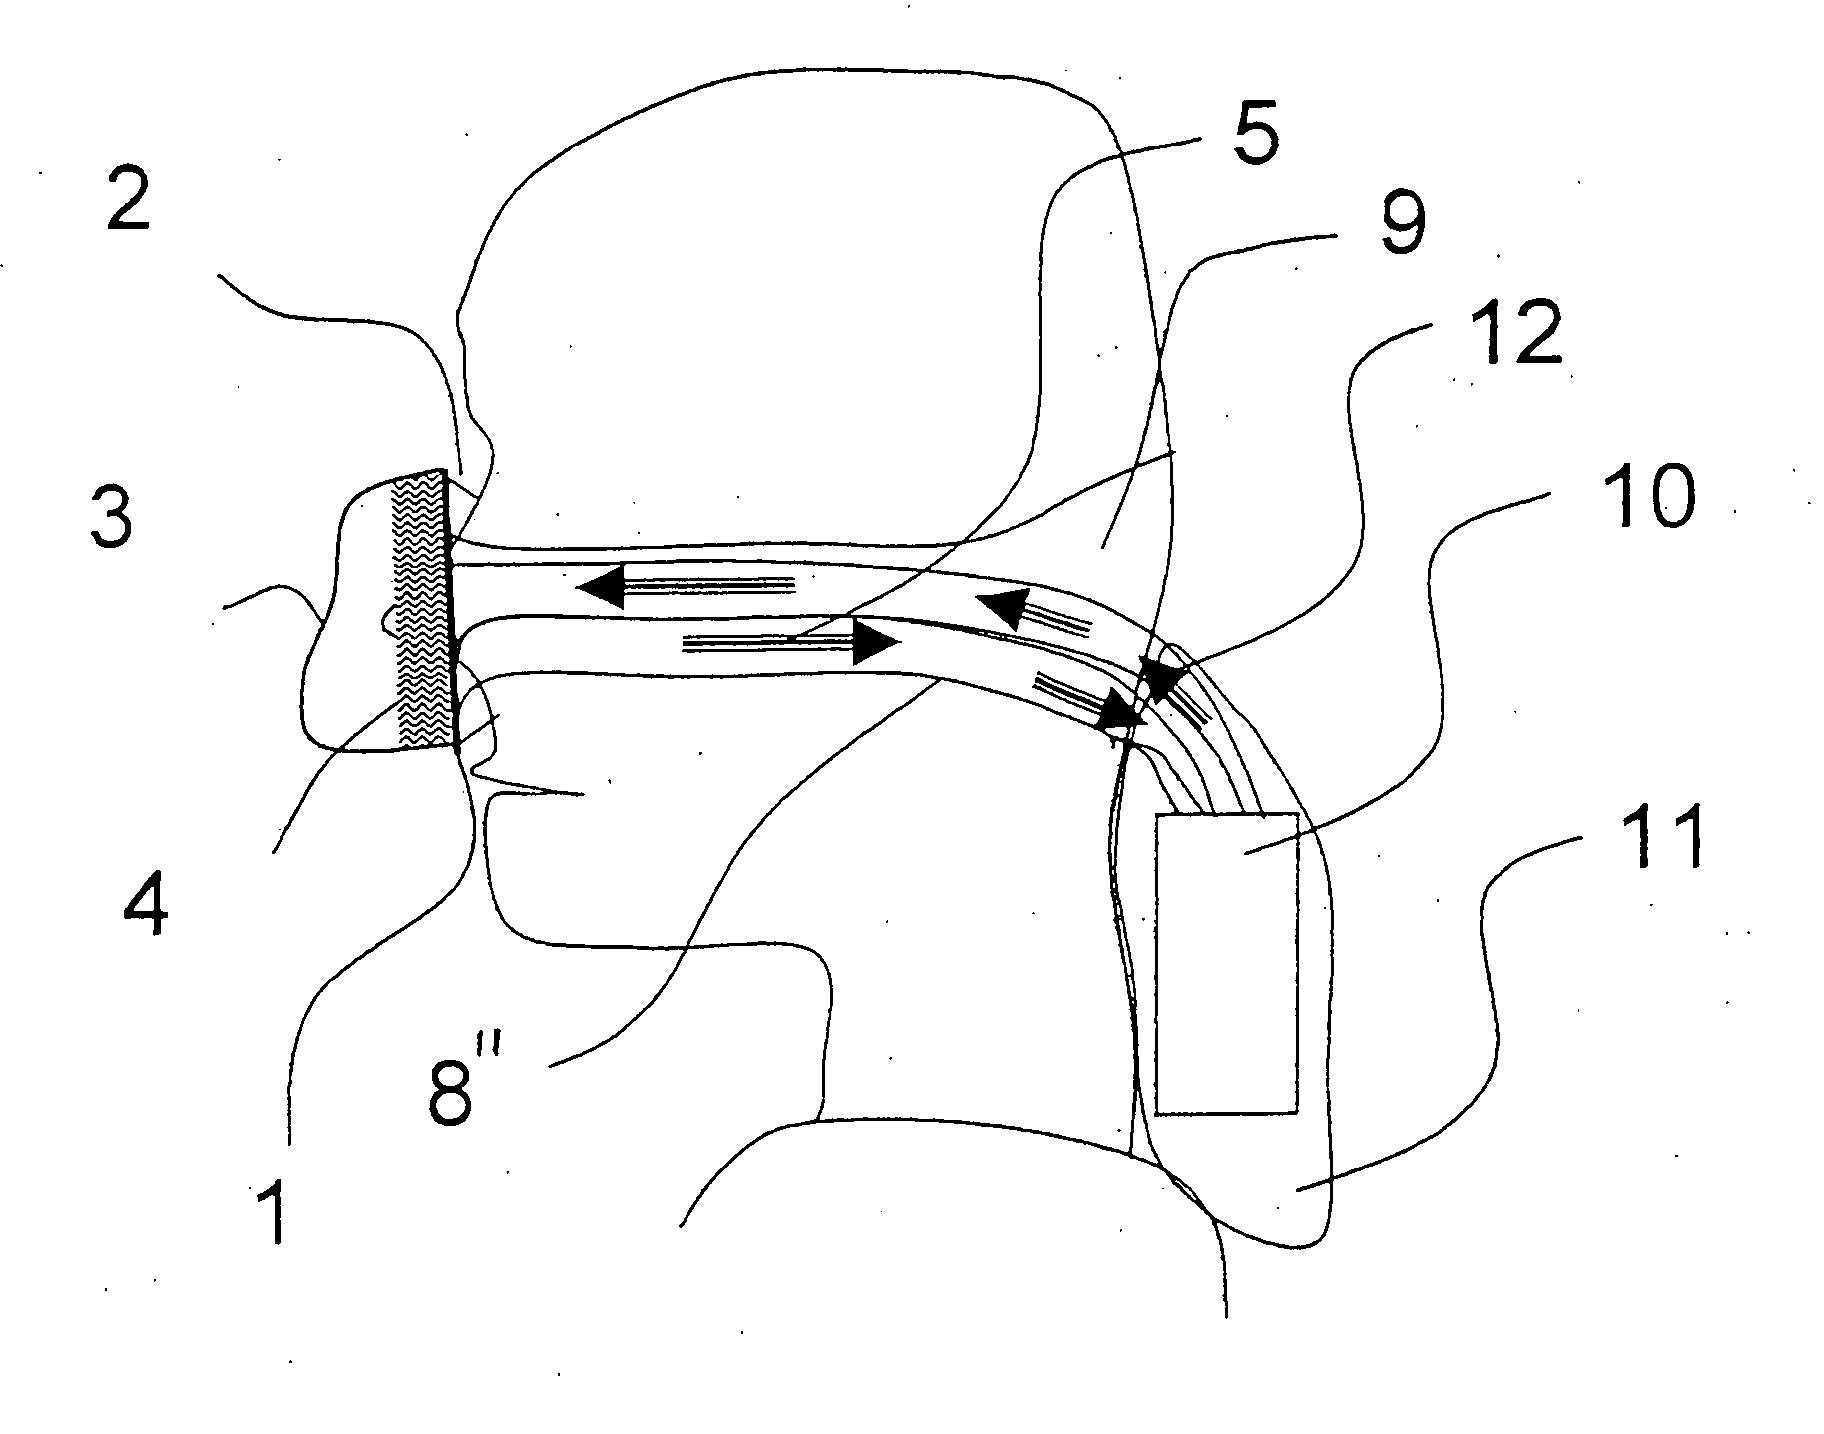 Breathing mask with integrated suction area